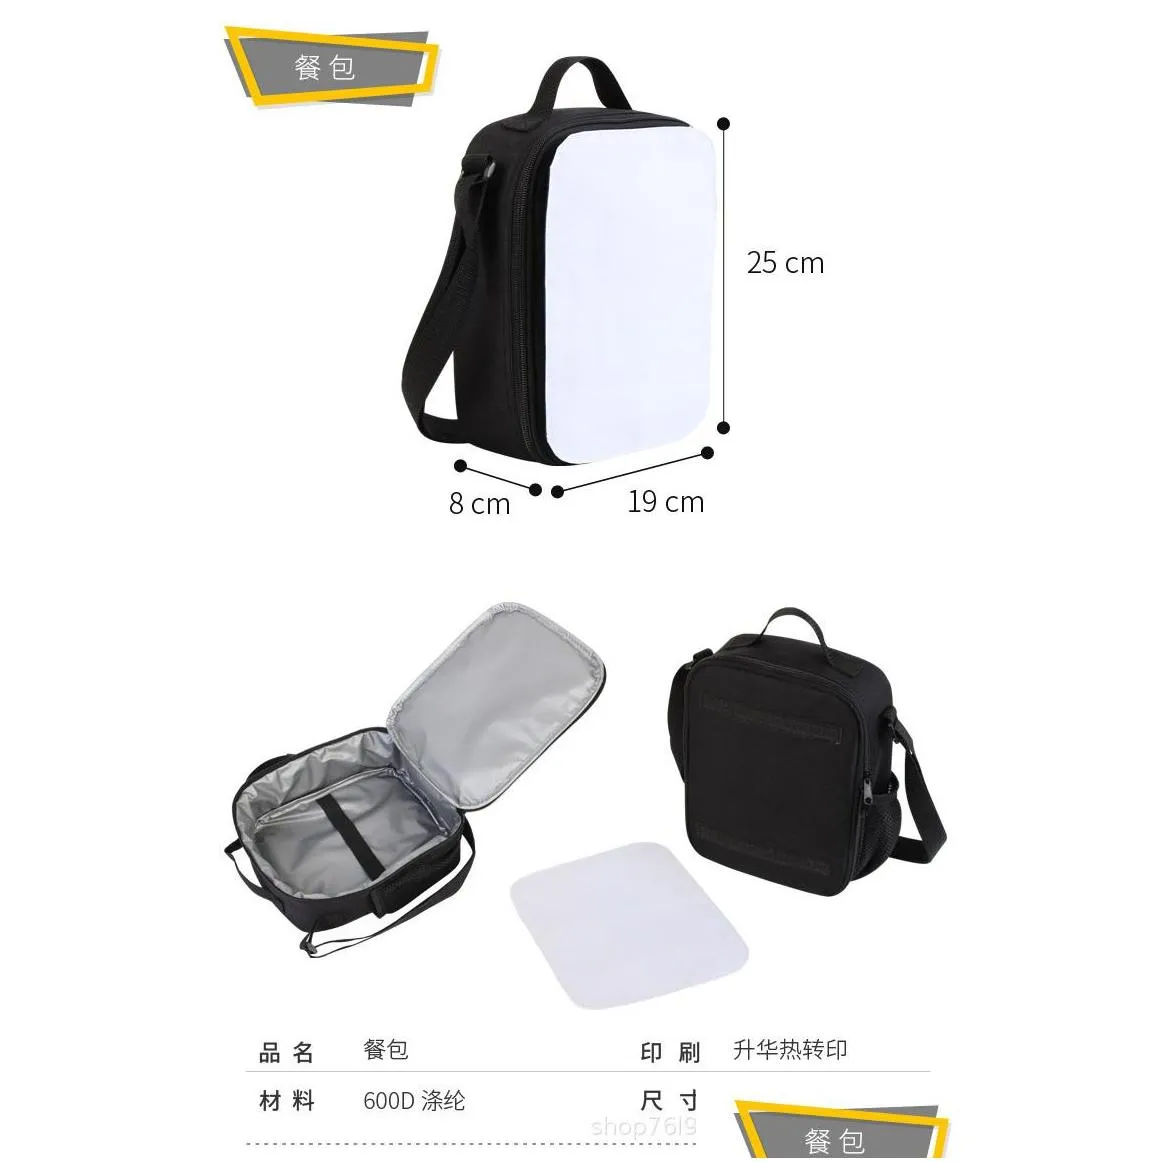 ups sublimation blank travel bag personalized pattern heat transfer printing logo fitness bag outdoor sports bag